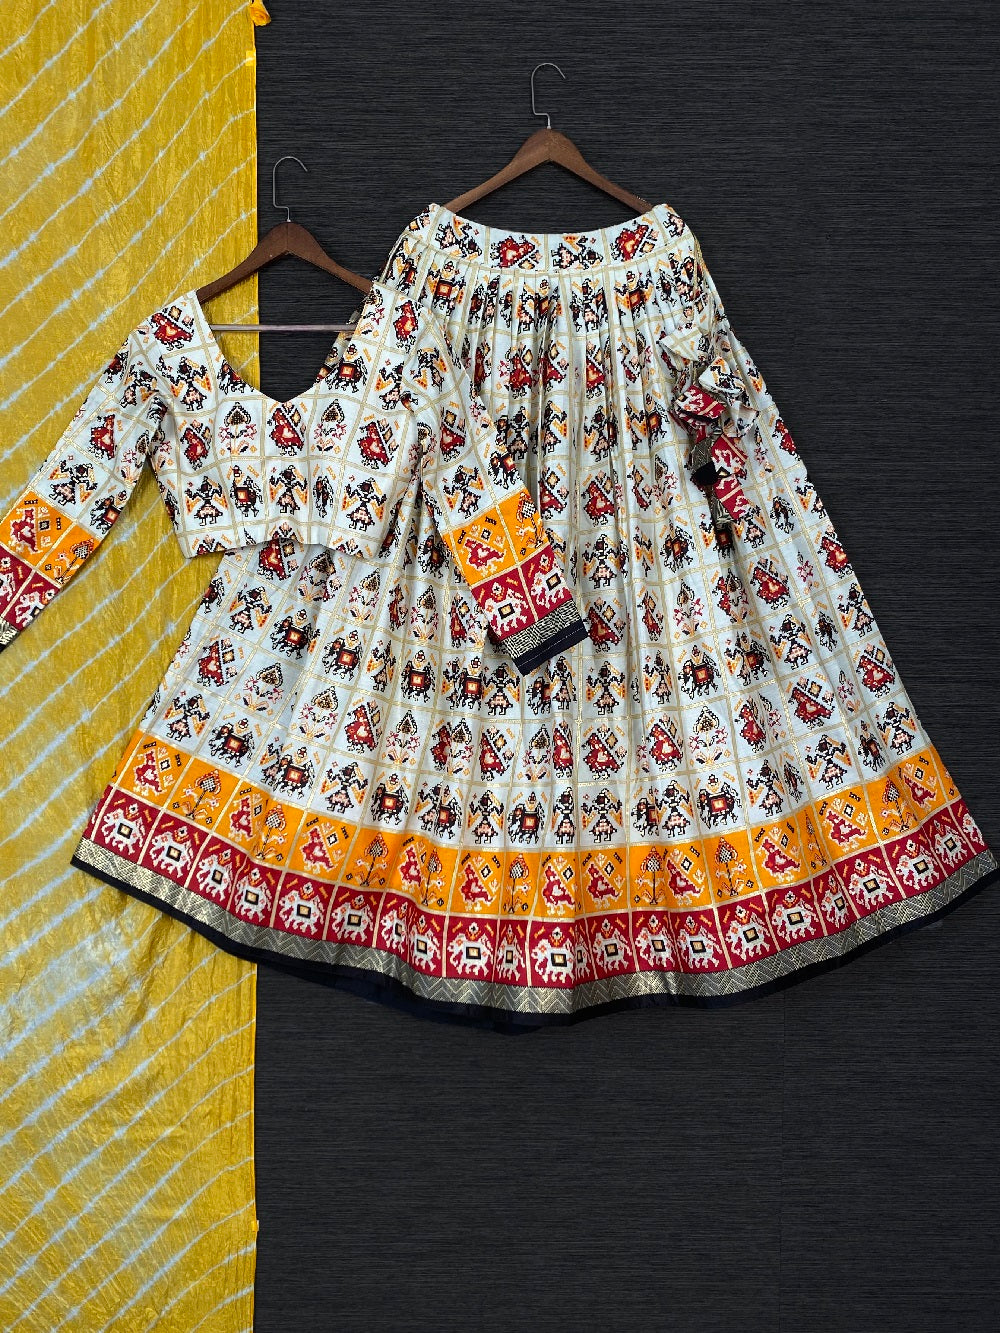 Red Gujrati Lehanga for Girls online at low price – fancydresswale.com